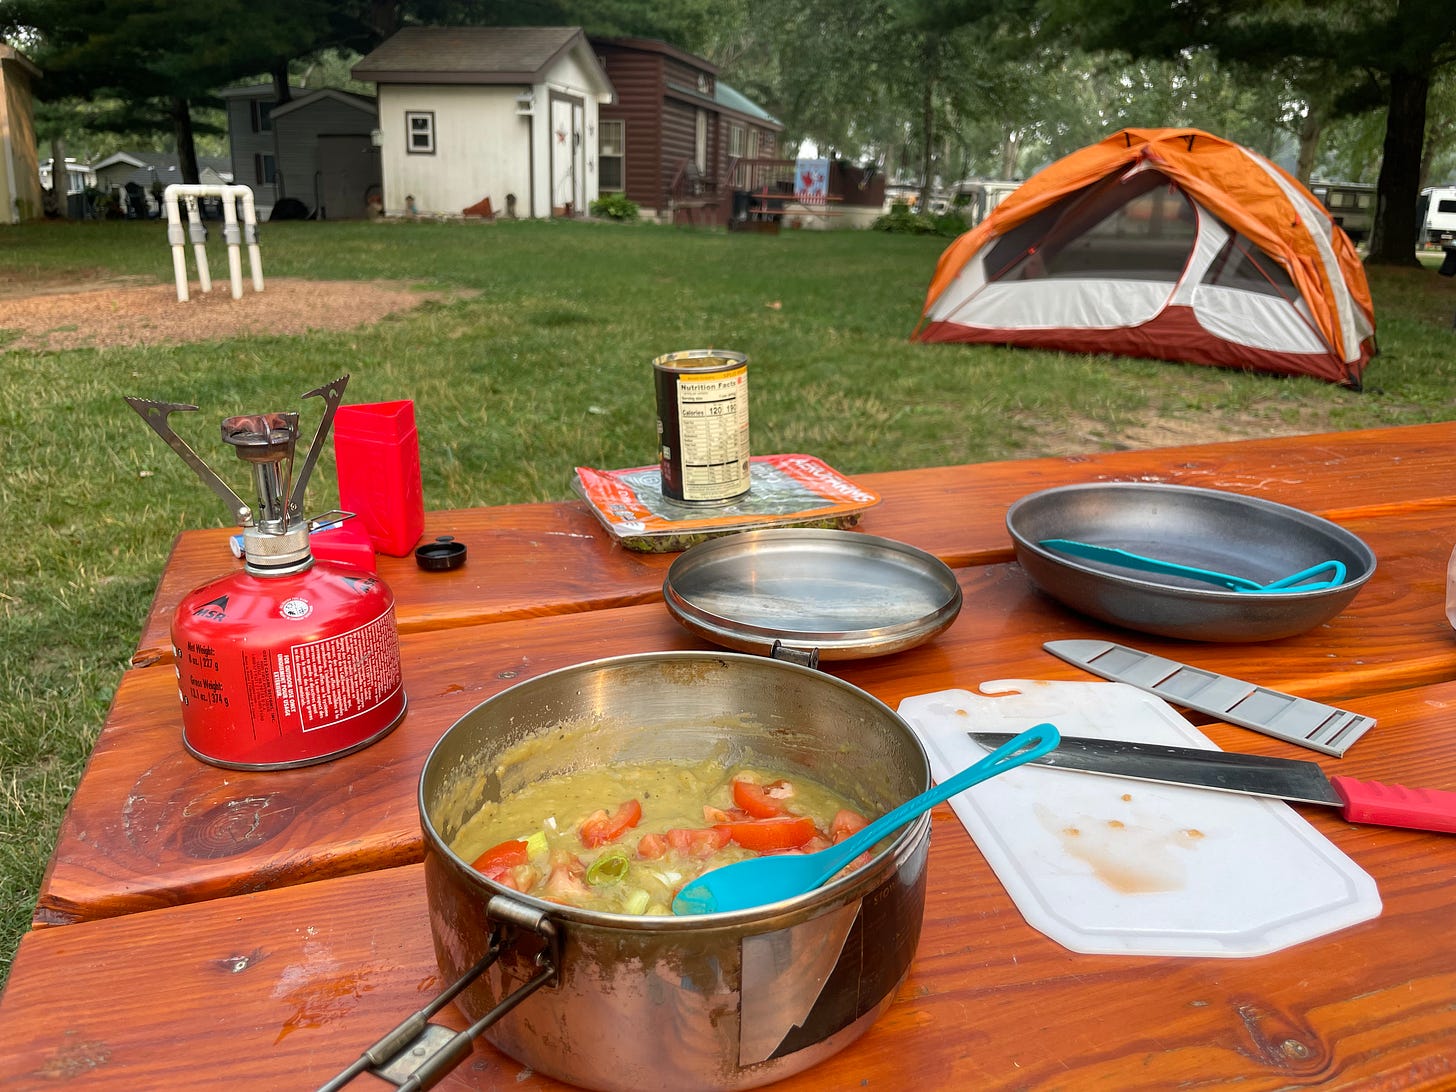 Photograph of a meal being prepared on a picnic table. There's a camp stove, a pot with green soup, a plate, a knife and cutting board.